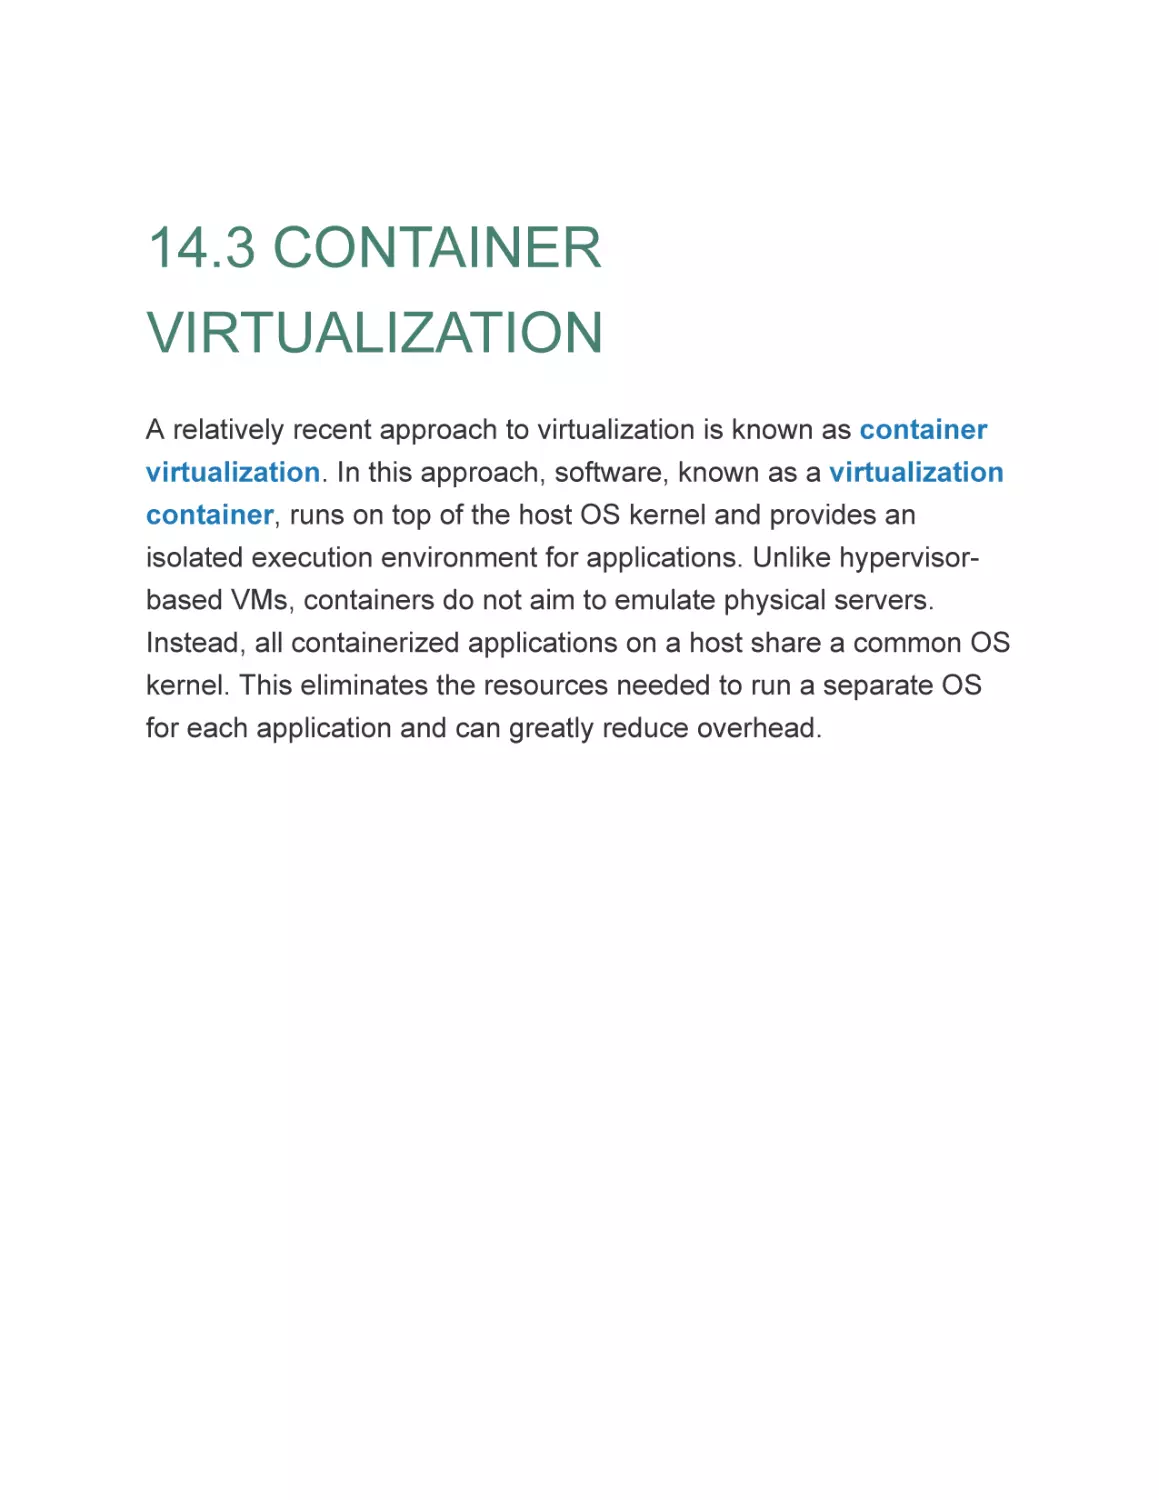 14.3 CONTAINER VIRTUALIZATION